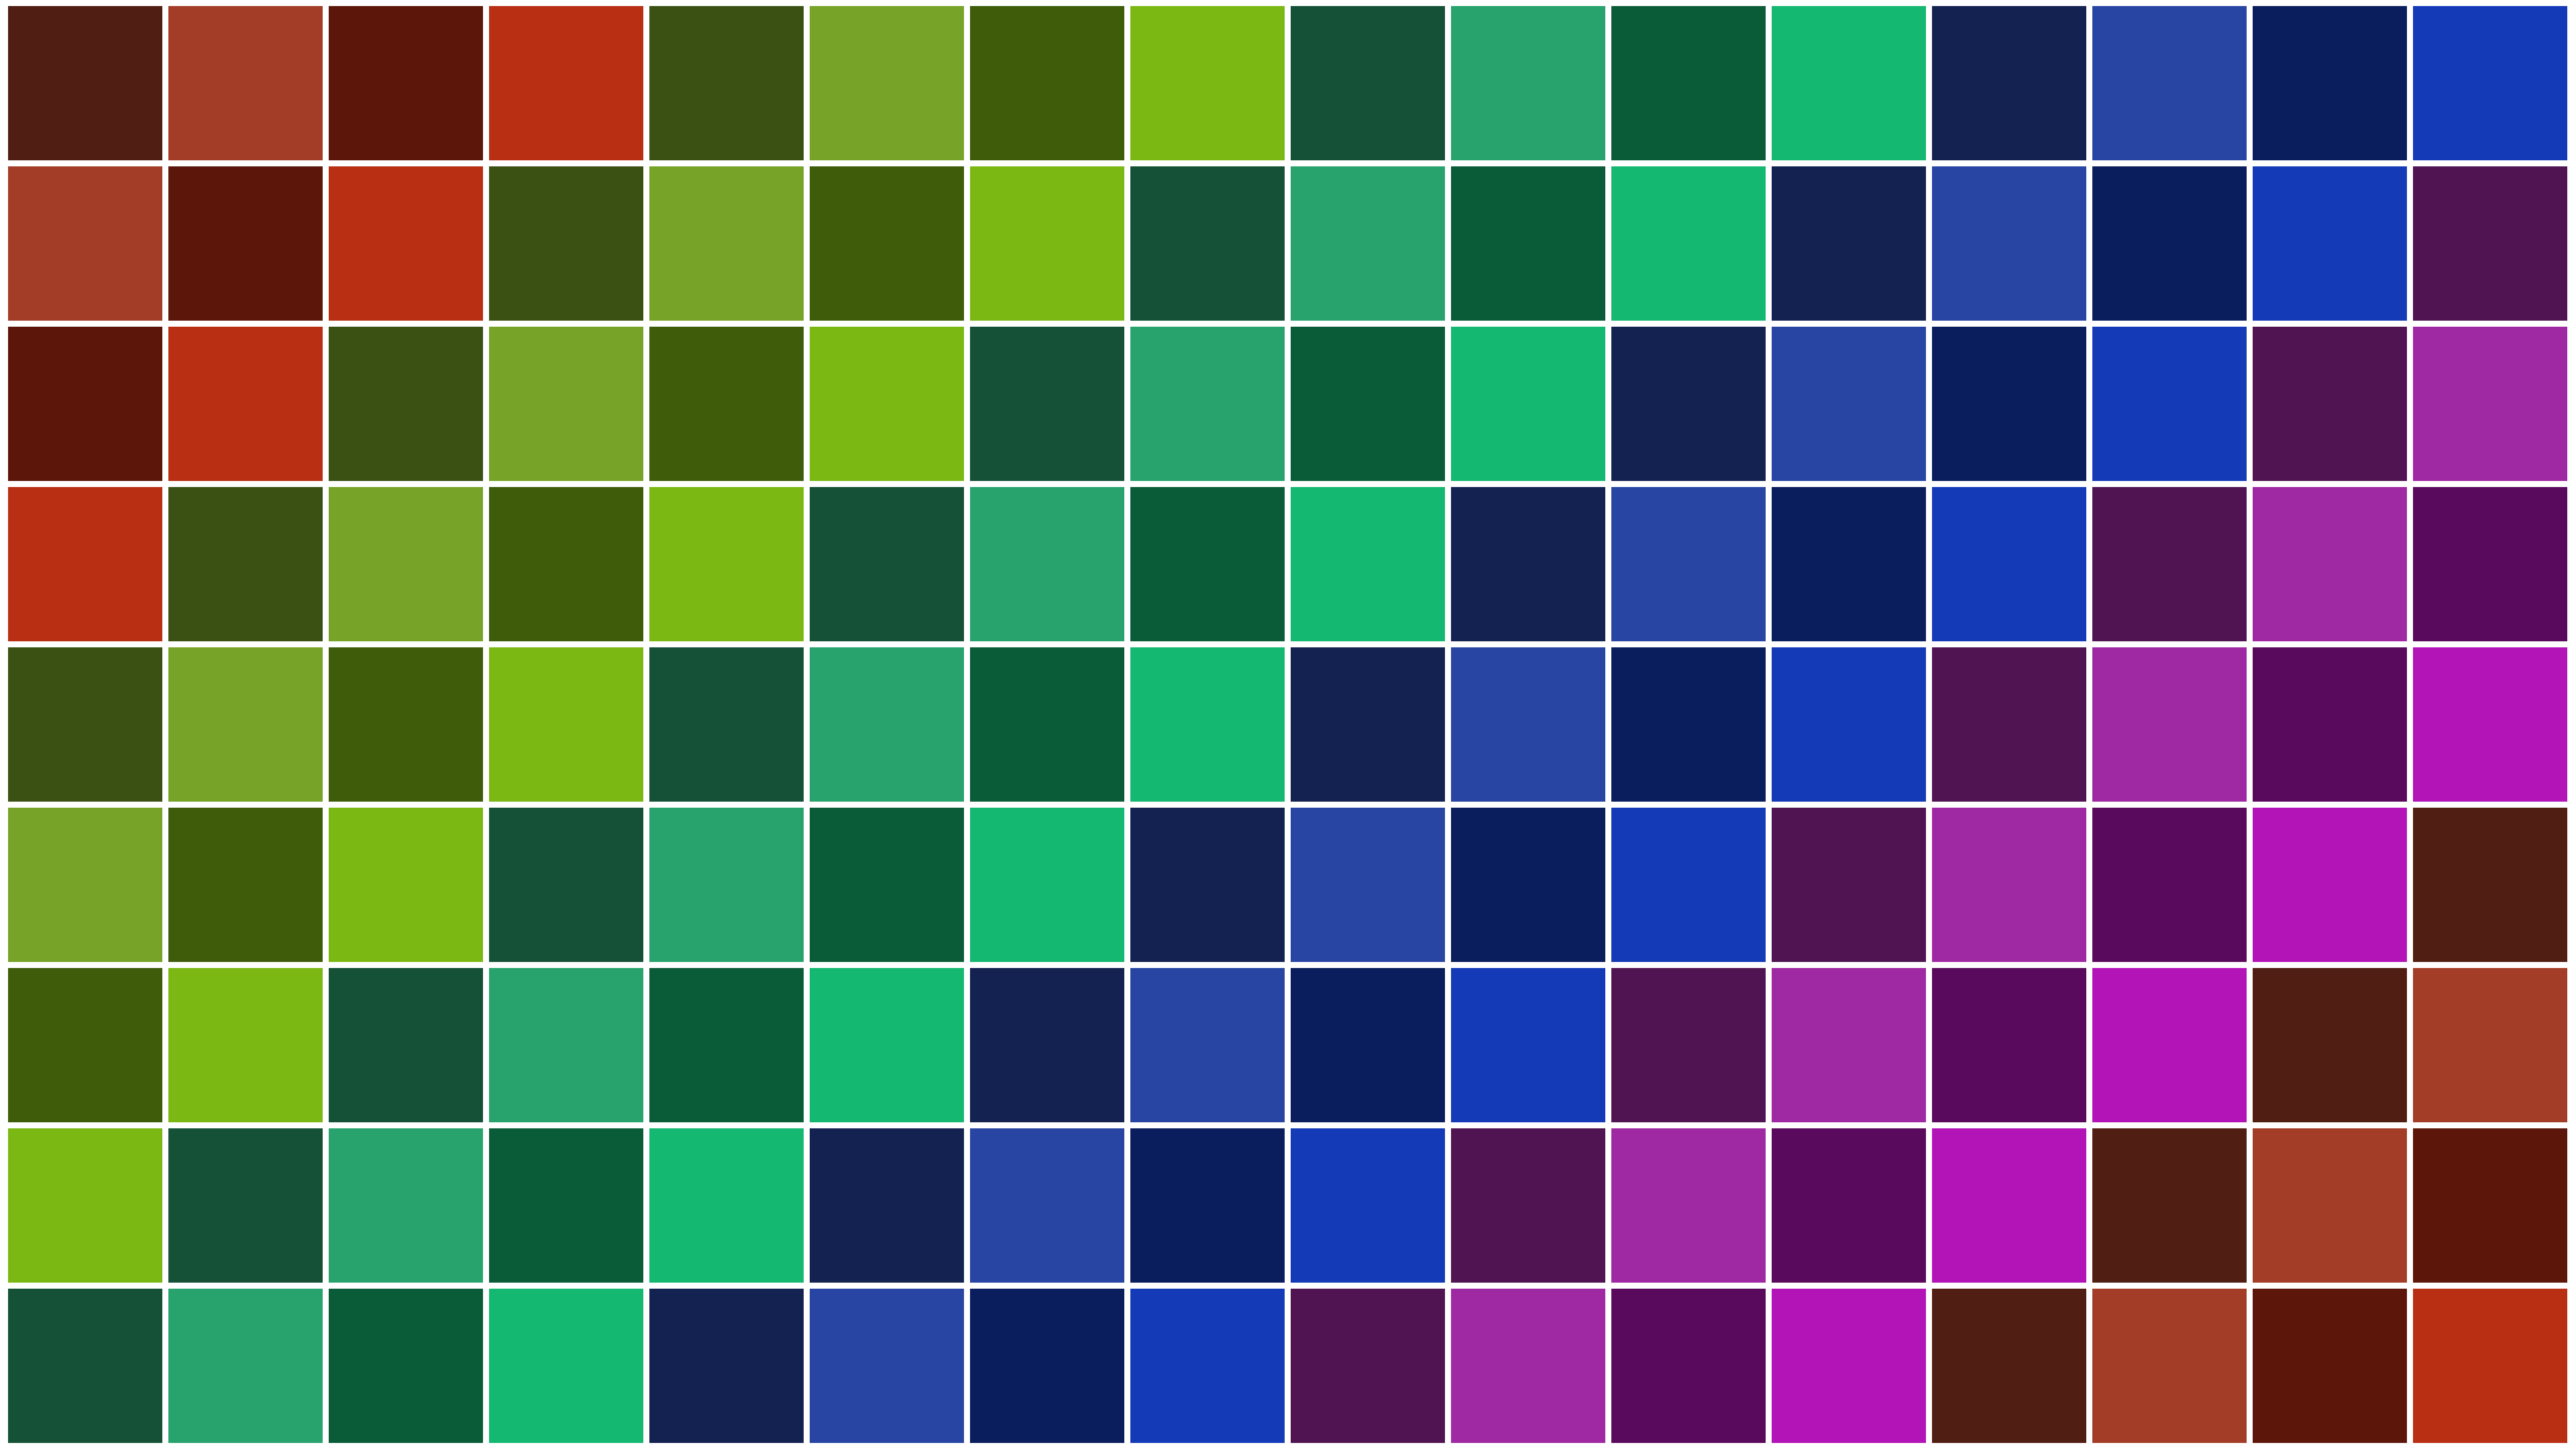 Palette 4K wallpaper for your desktop or mobile screen free and easy to download